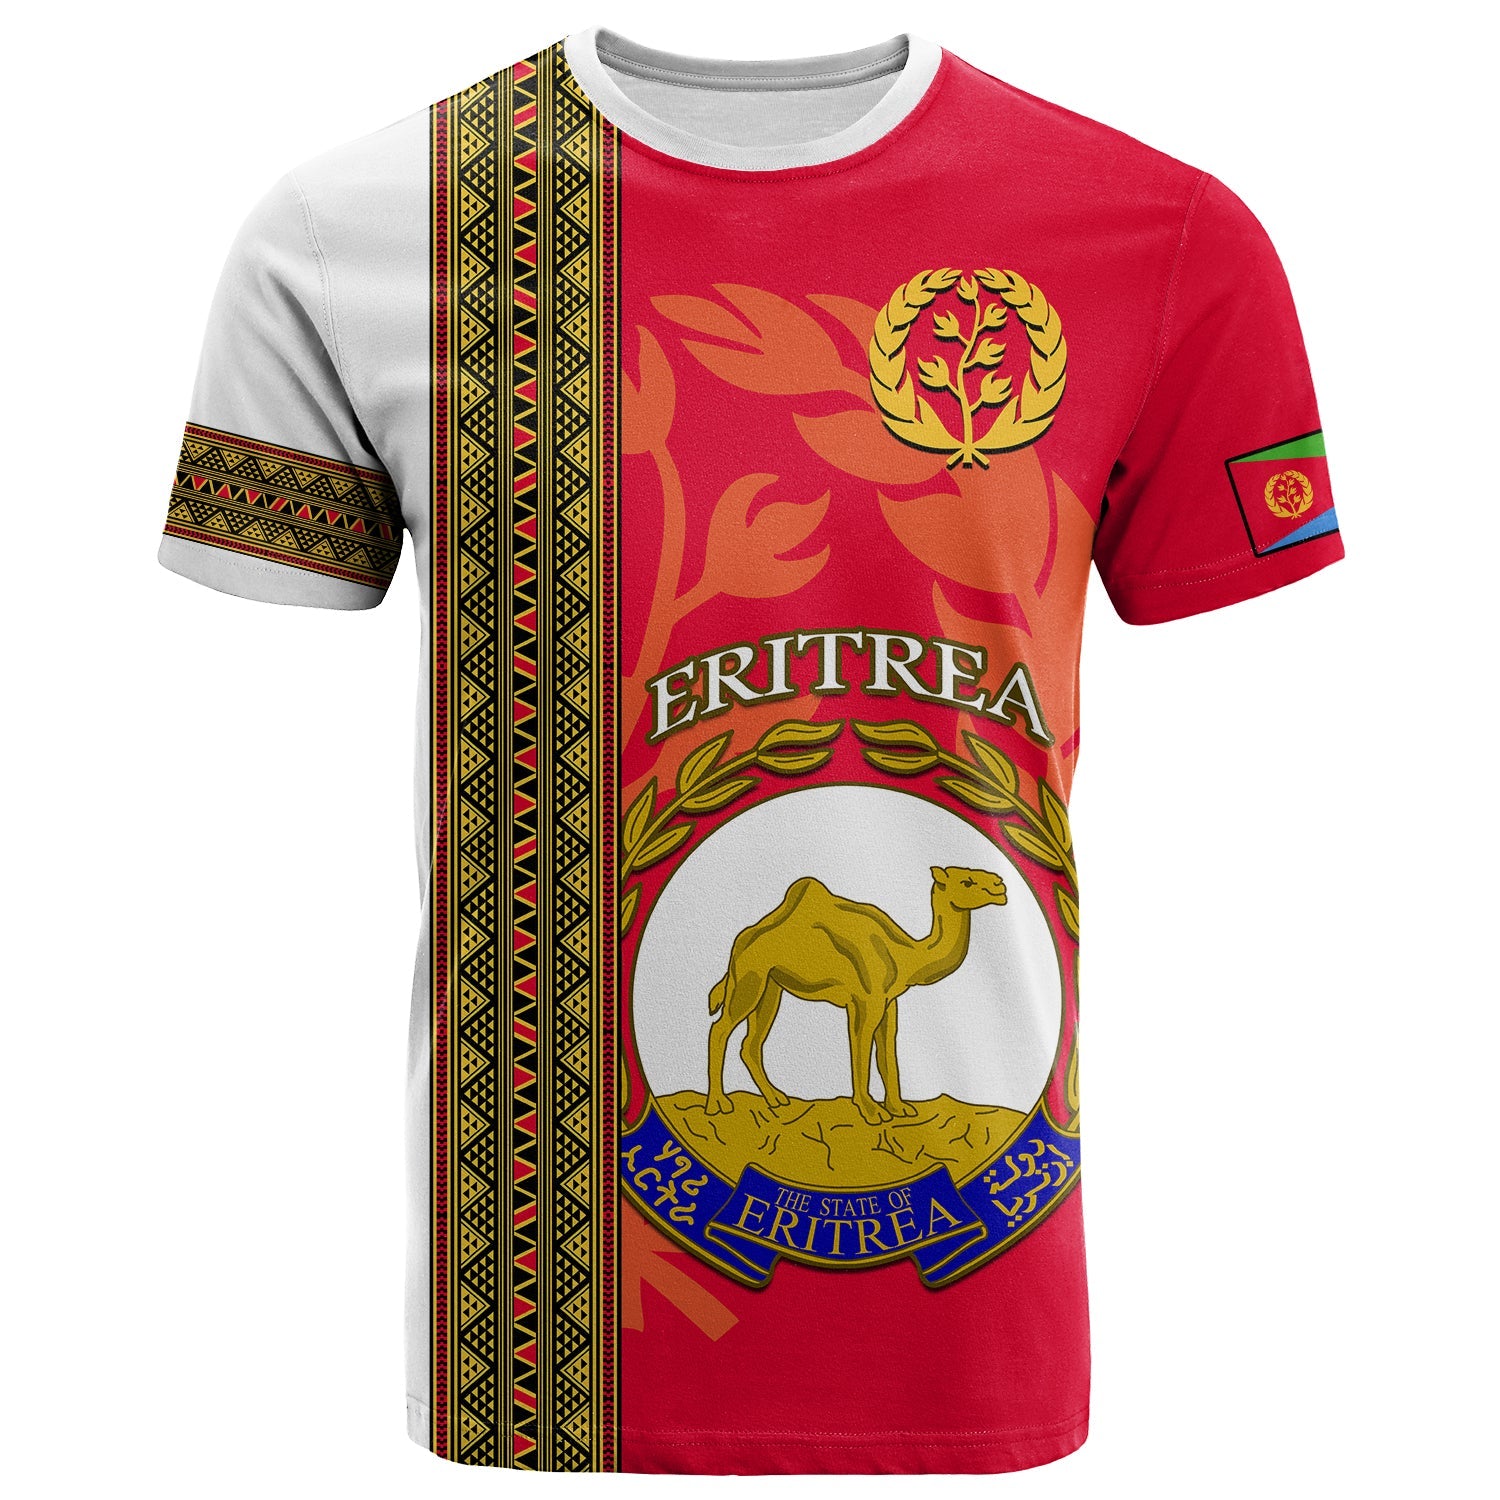 eritrea-t-shirt-african-pattern-happy-independence-day-version-white